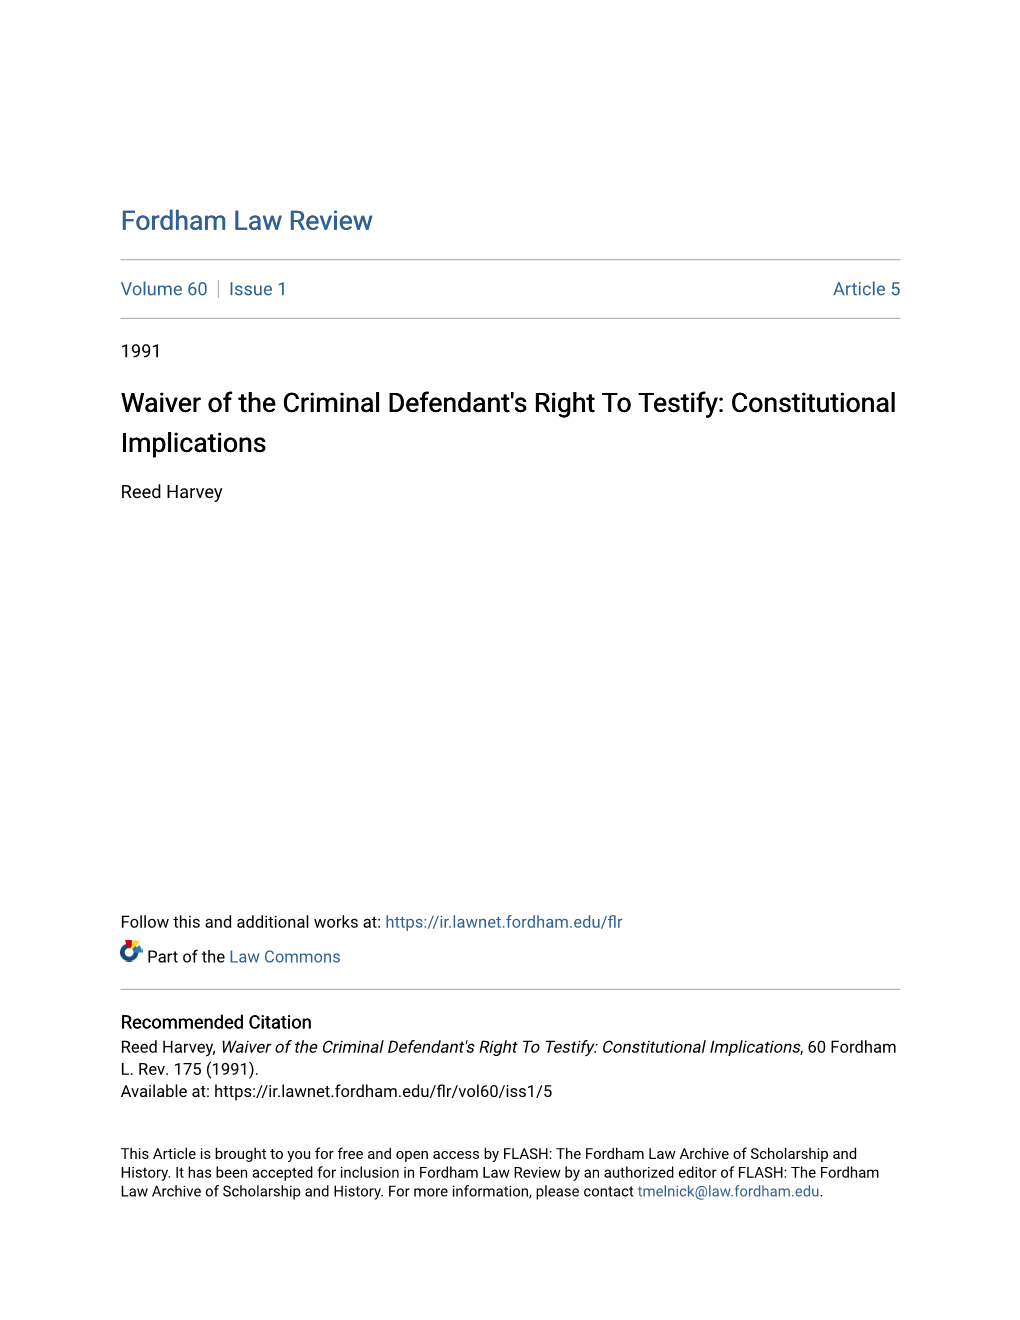 Waiver of the Criminal Defendant's Right to Testify: Constitutional Implications